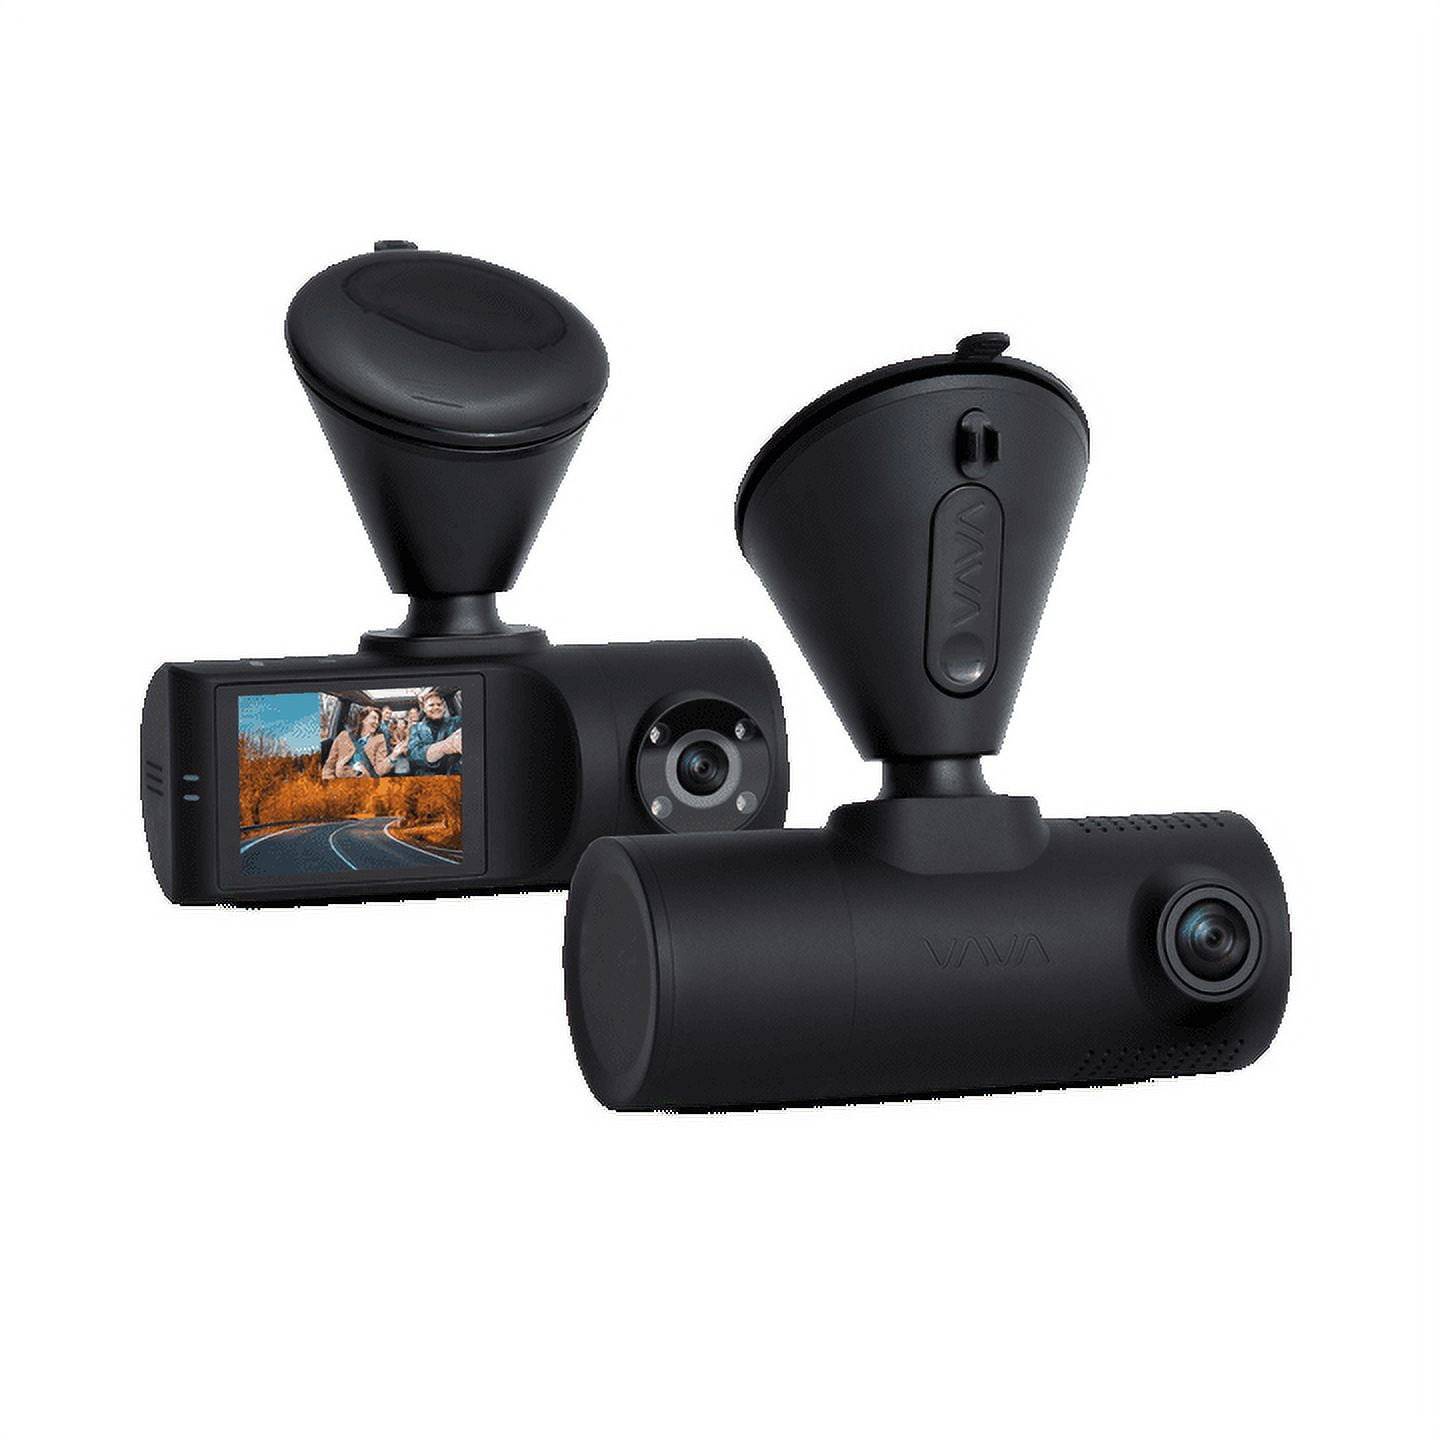 VAVA Dash Cam 2K review: Good value, but not the best